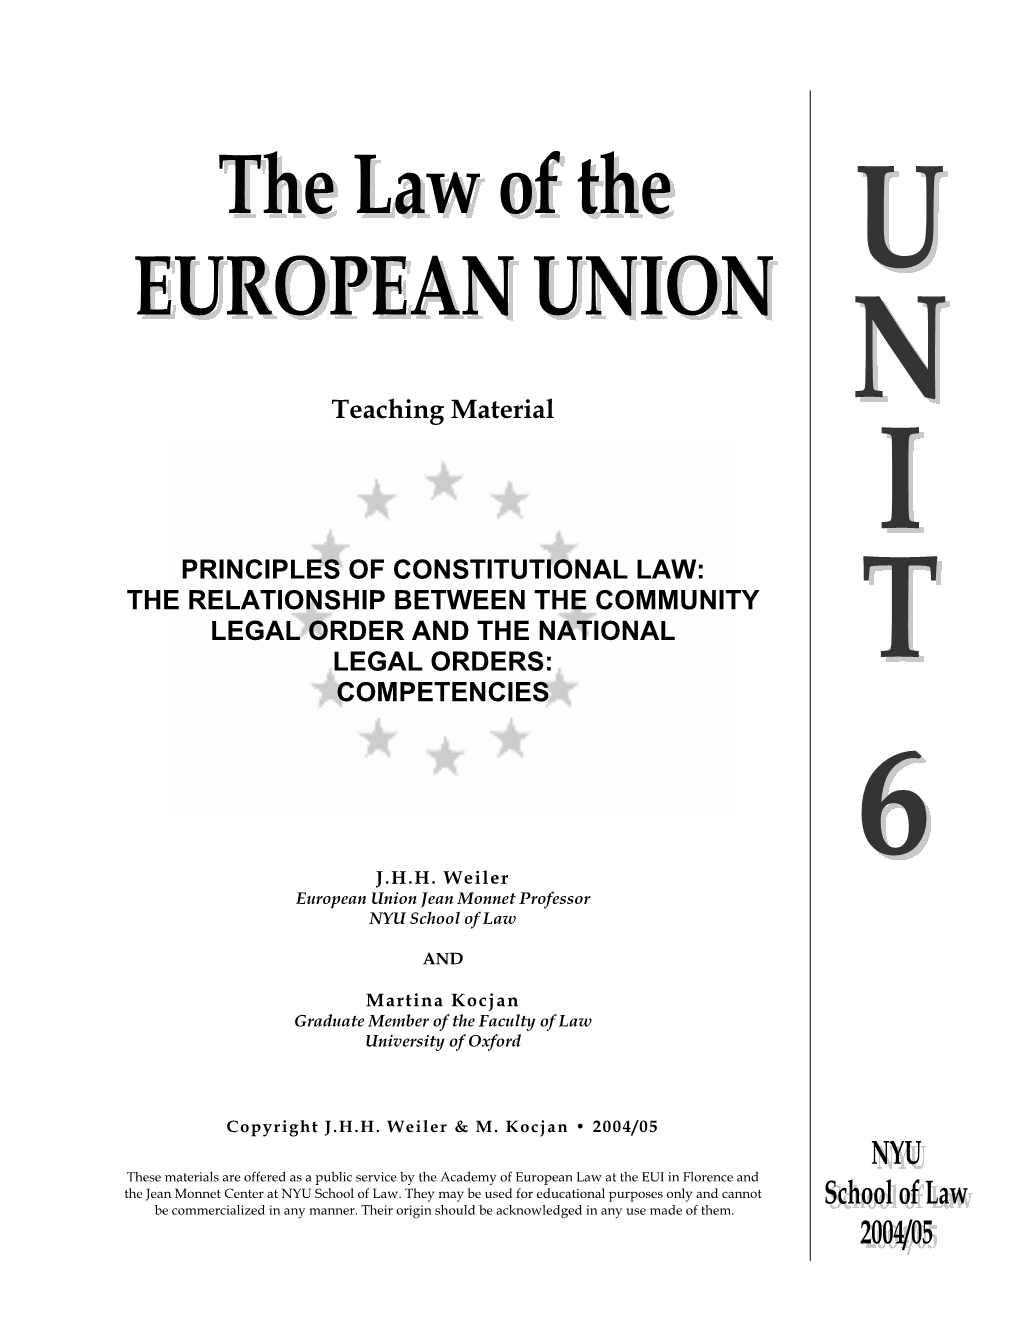 The Relationship Between the Community Legal Order and the National Legal Orders: Competencies